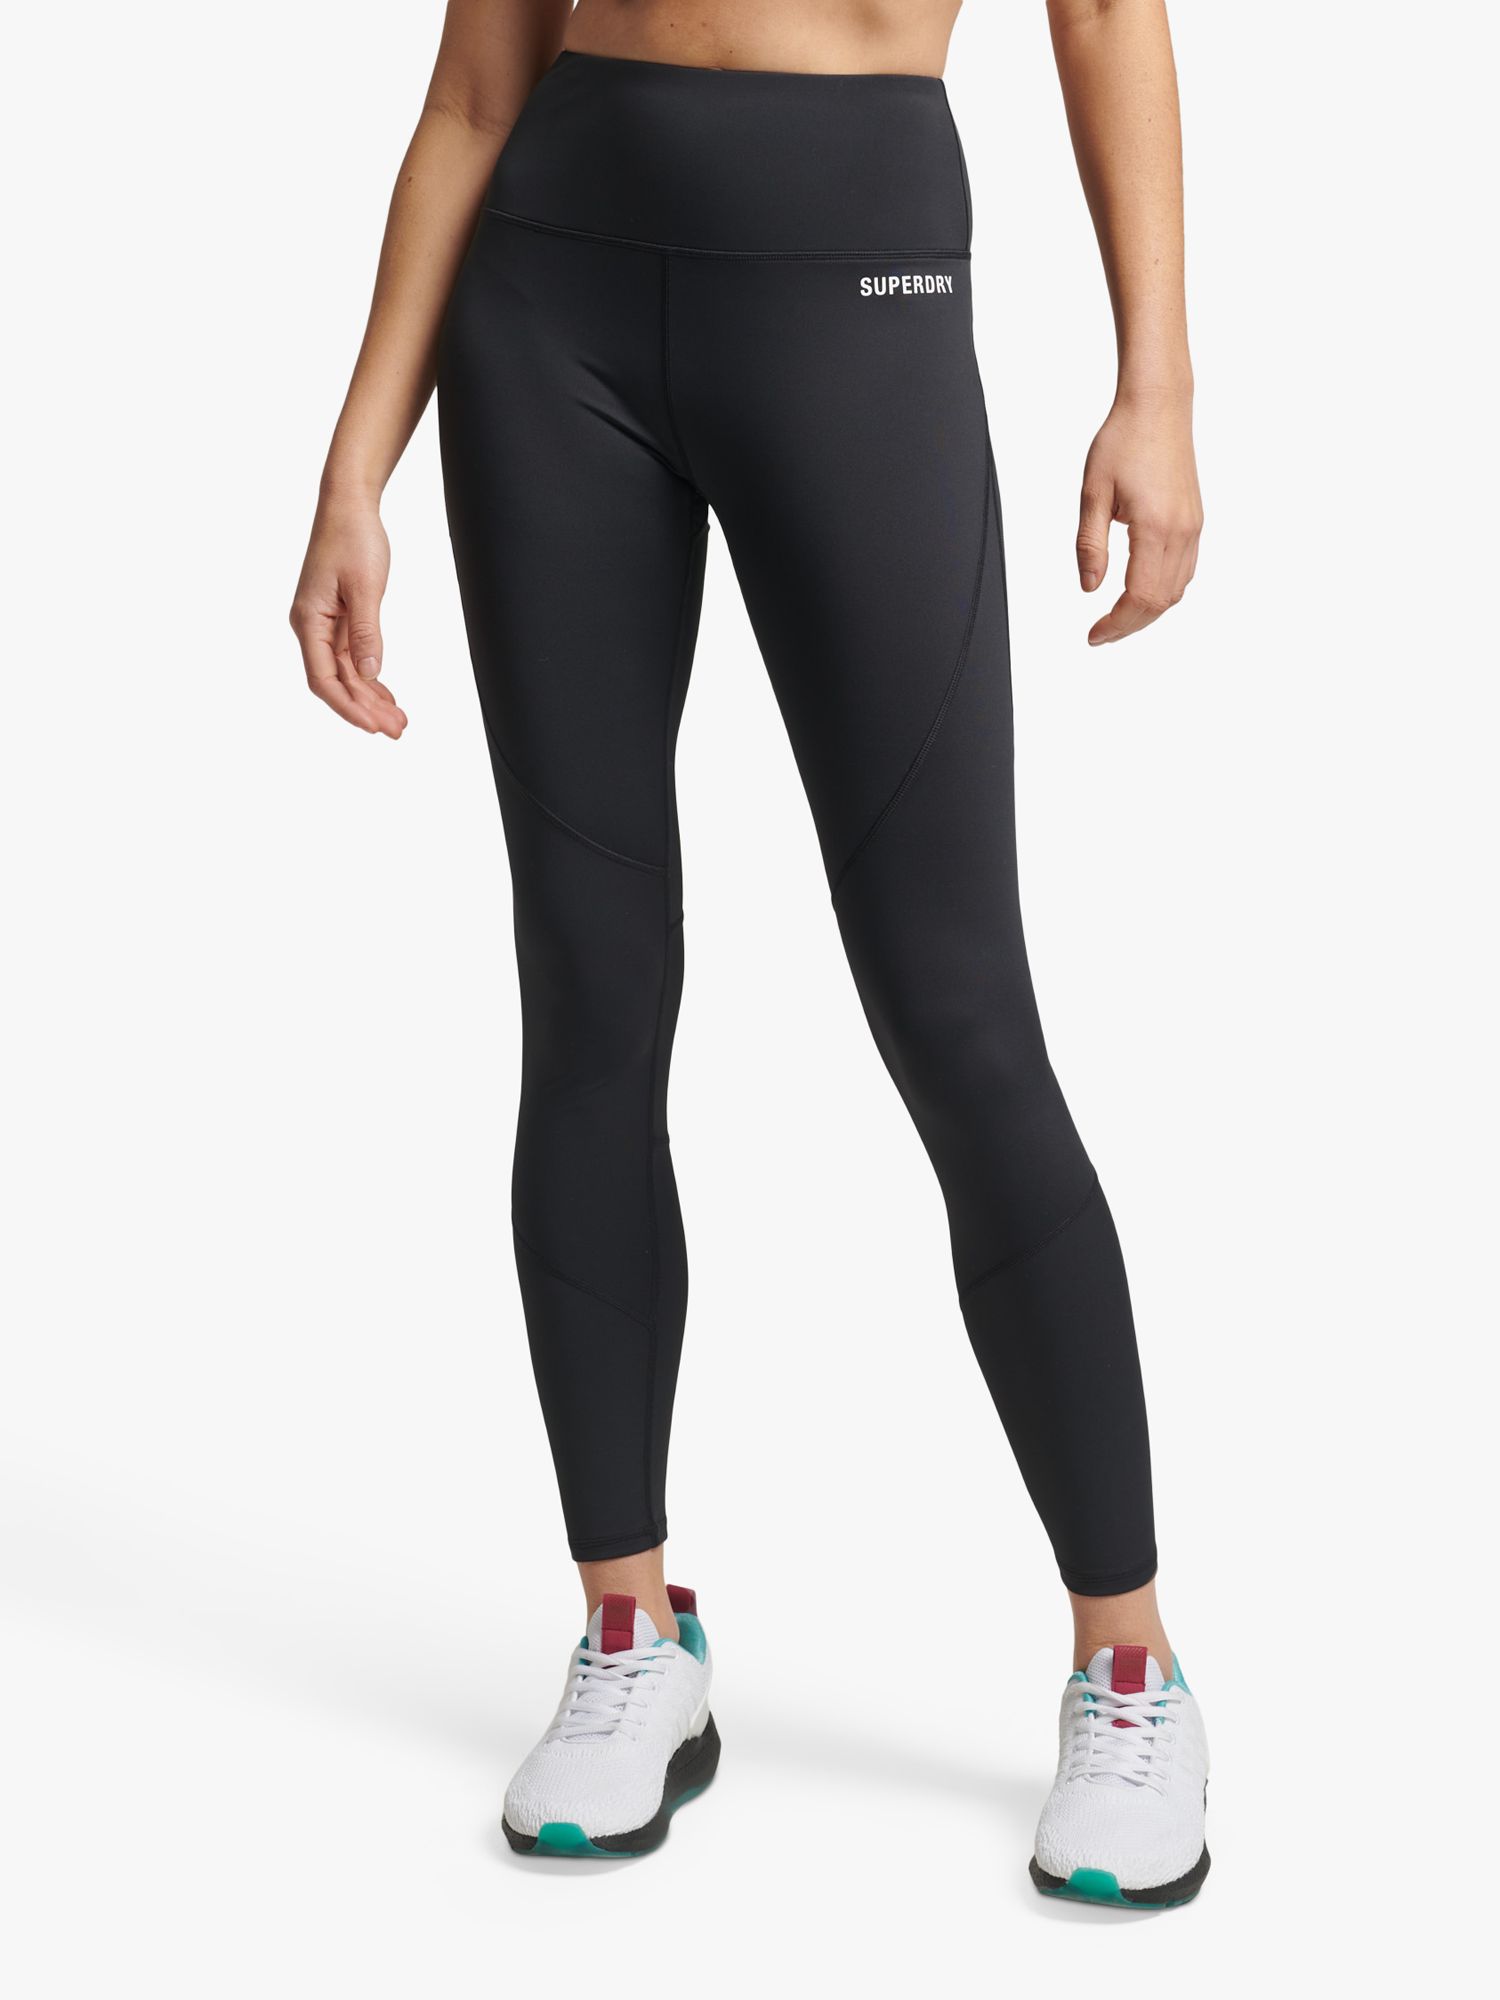 Superdry Core Length Tight Leggings at Lewis & Partners